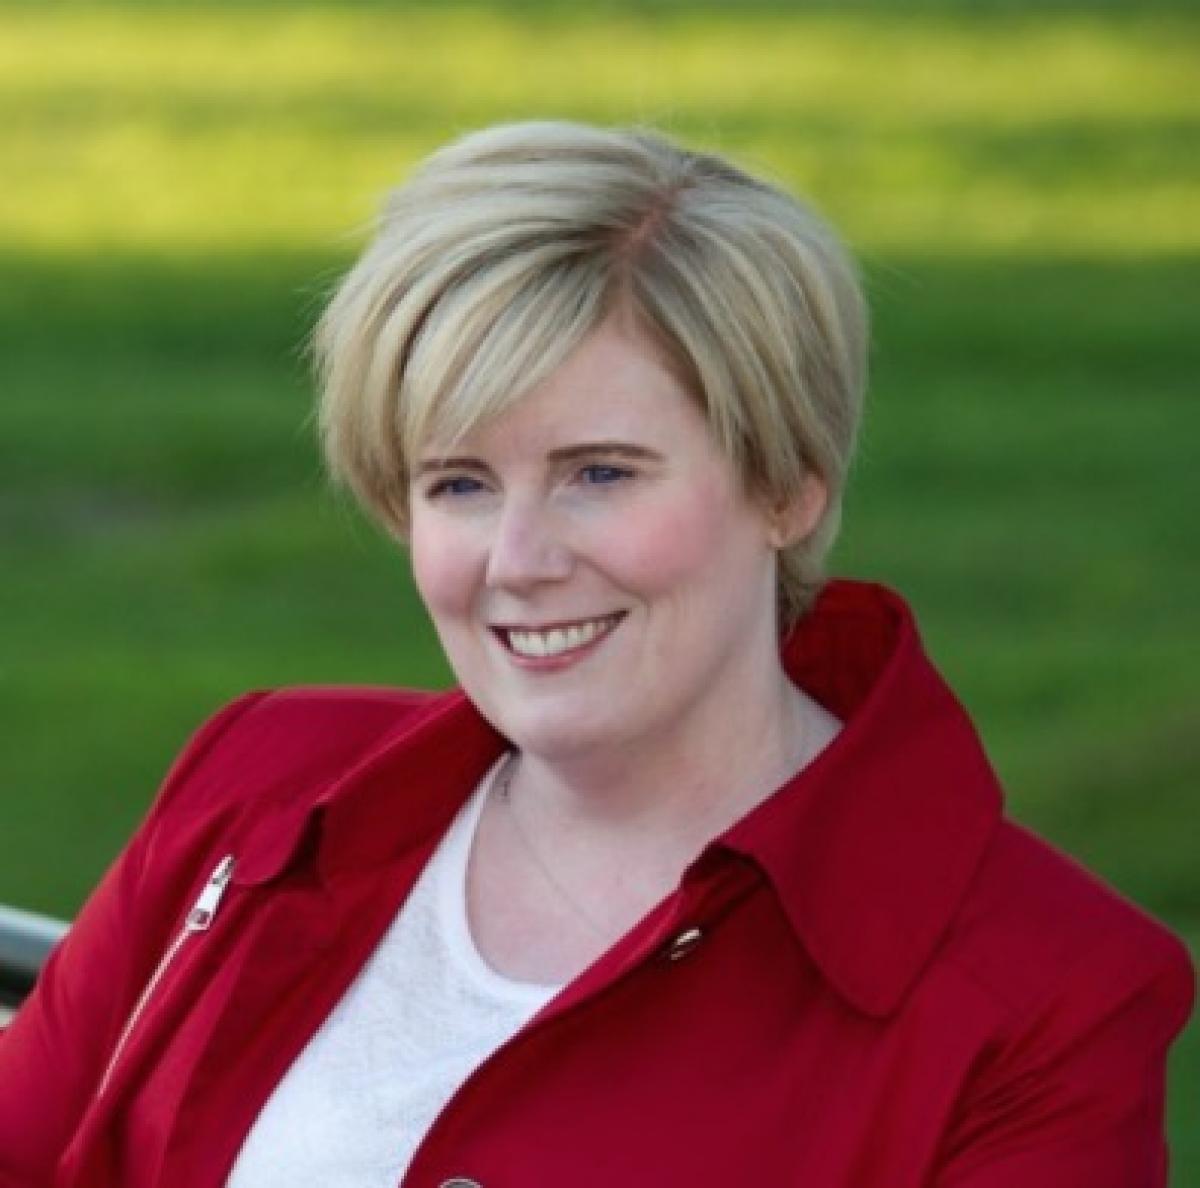 Carla Qualtrough was appointed Canada's Minister for Sport and Persons with Disabilities in November 2015.